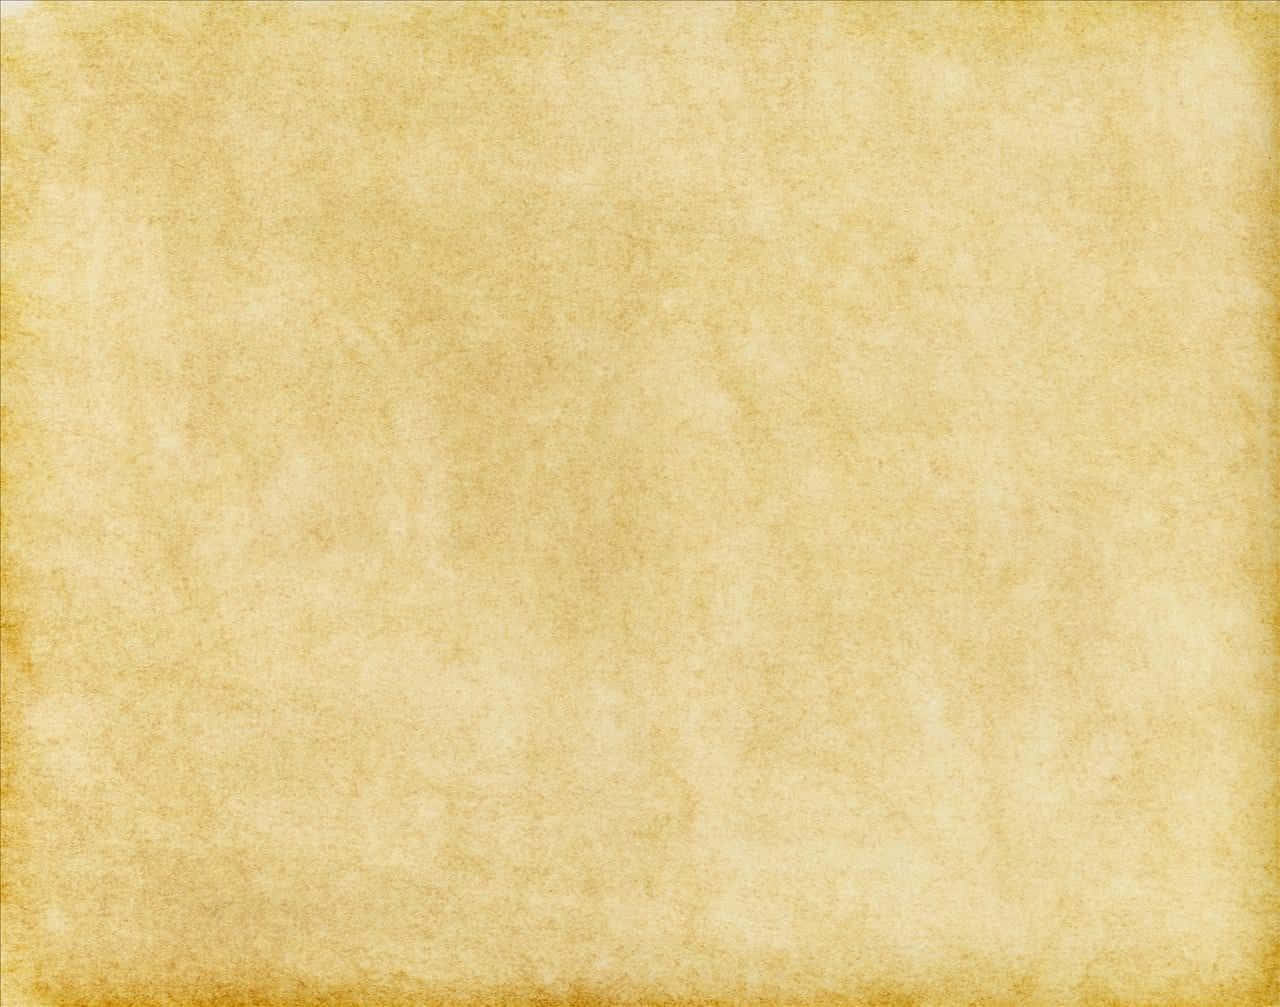 A Yellow Paper Texture With A Brown Background